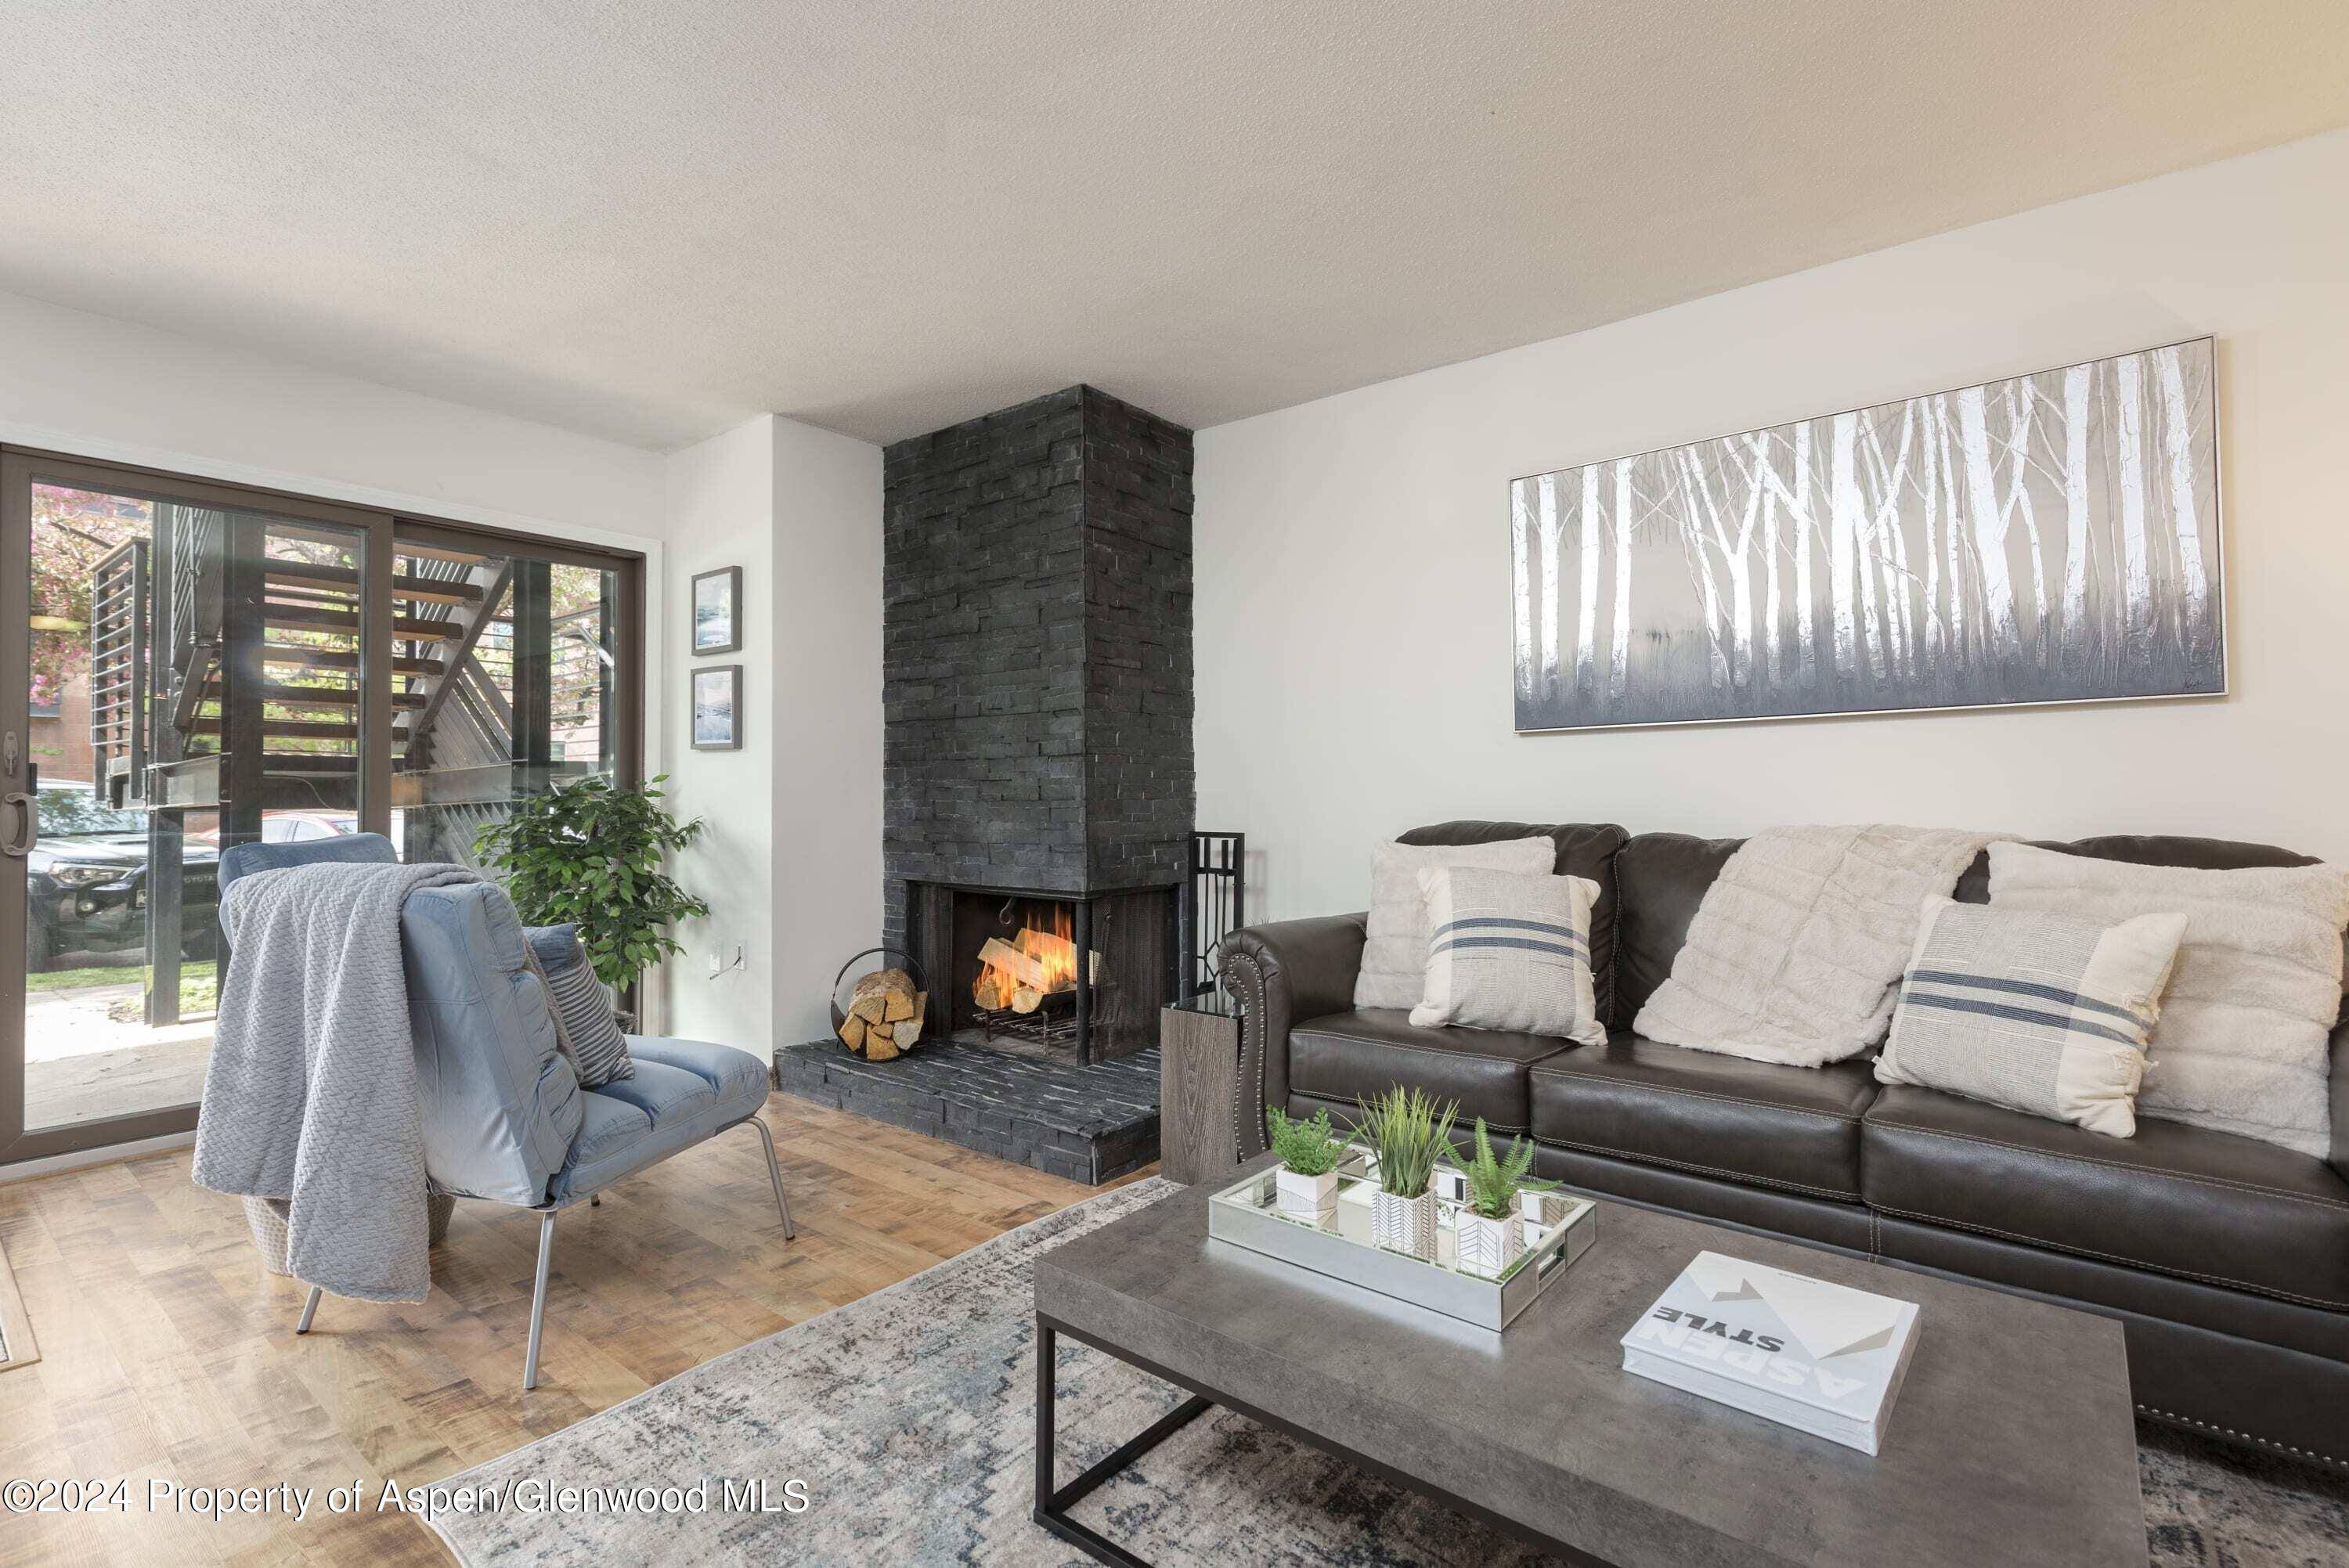 Nestled in the heart of Aspen's core, this charming ground level condominium offers the perfect blend of comfort and convenience for those seeking the ideal Aspen lifestyle.